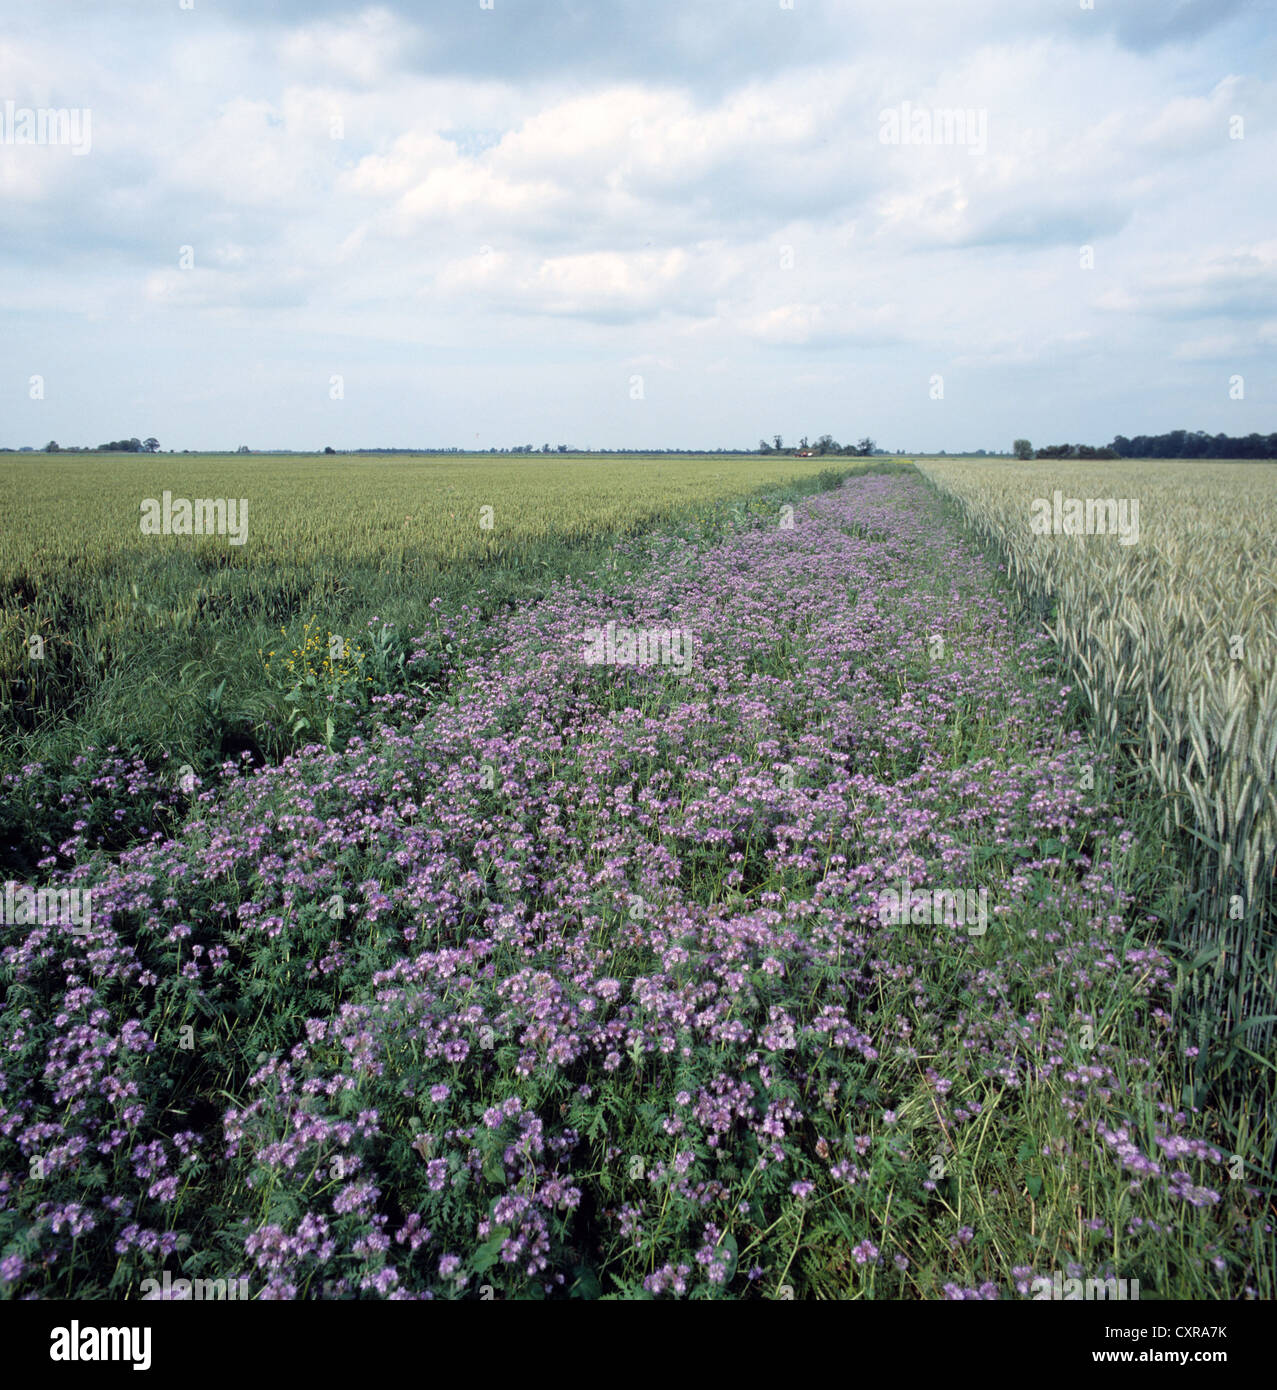 Phacelia in flower in field conservervation bank between two cereal crops. Stock Photo